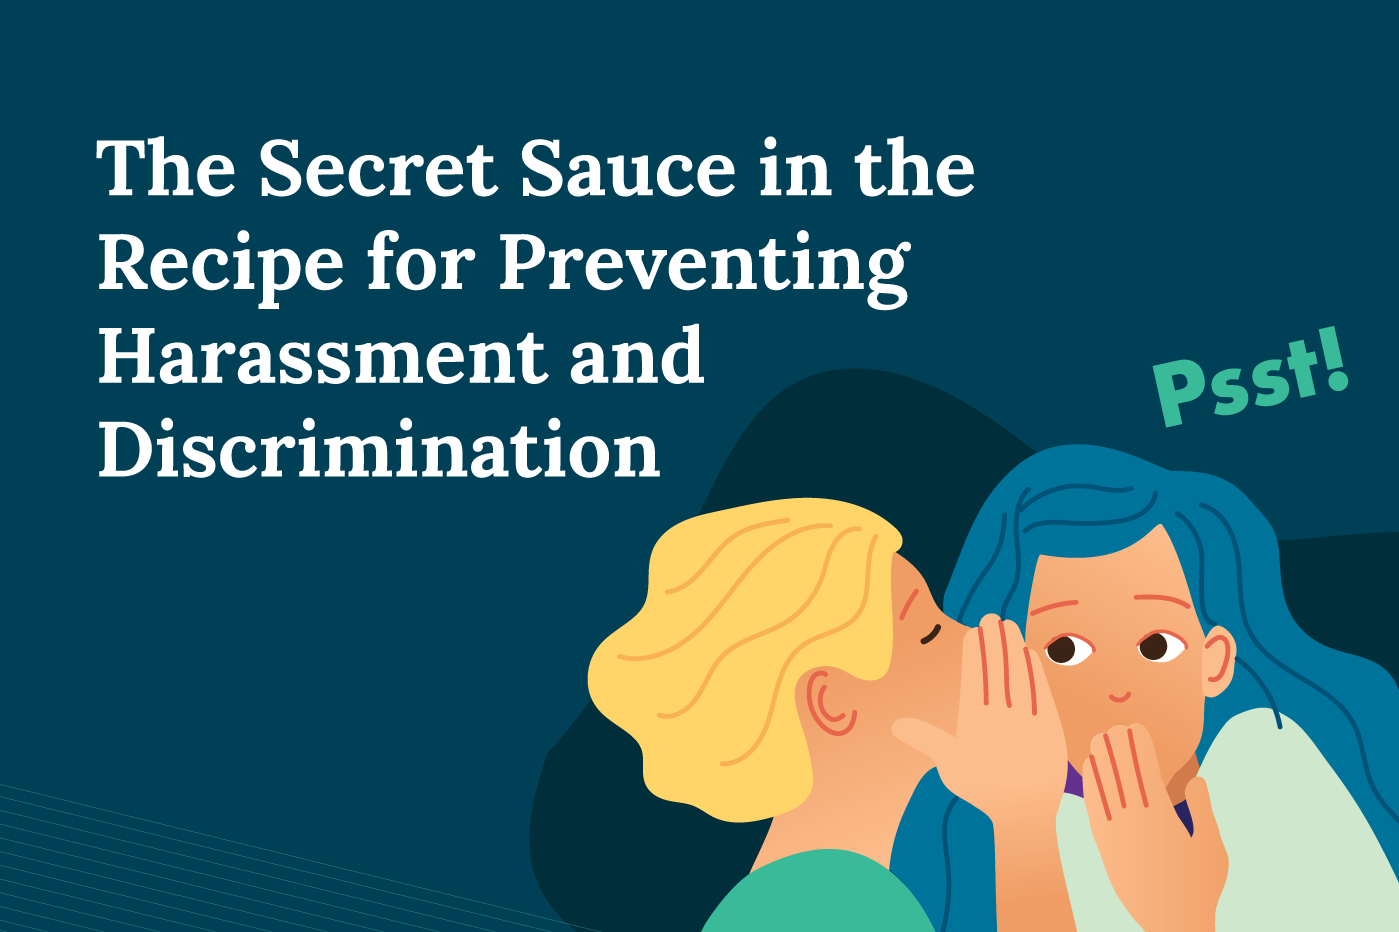 Inclusivity – The Secret Sauce in the Recipe for Preventing Harassment and Discrimination